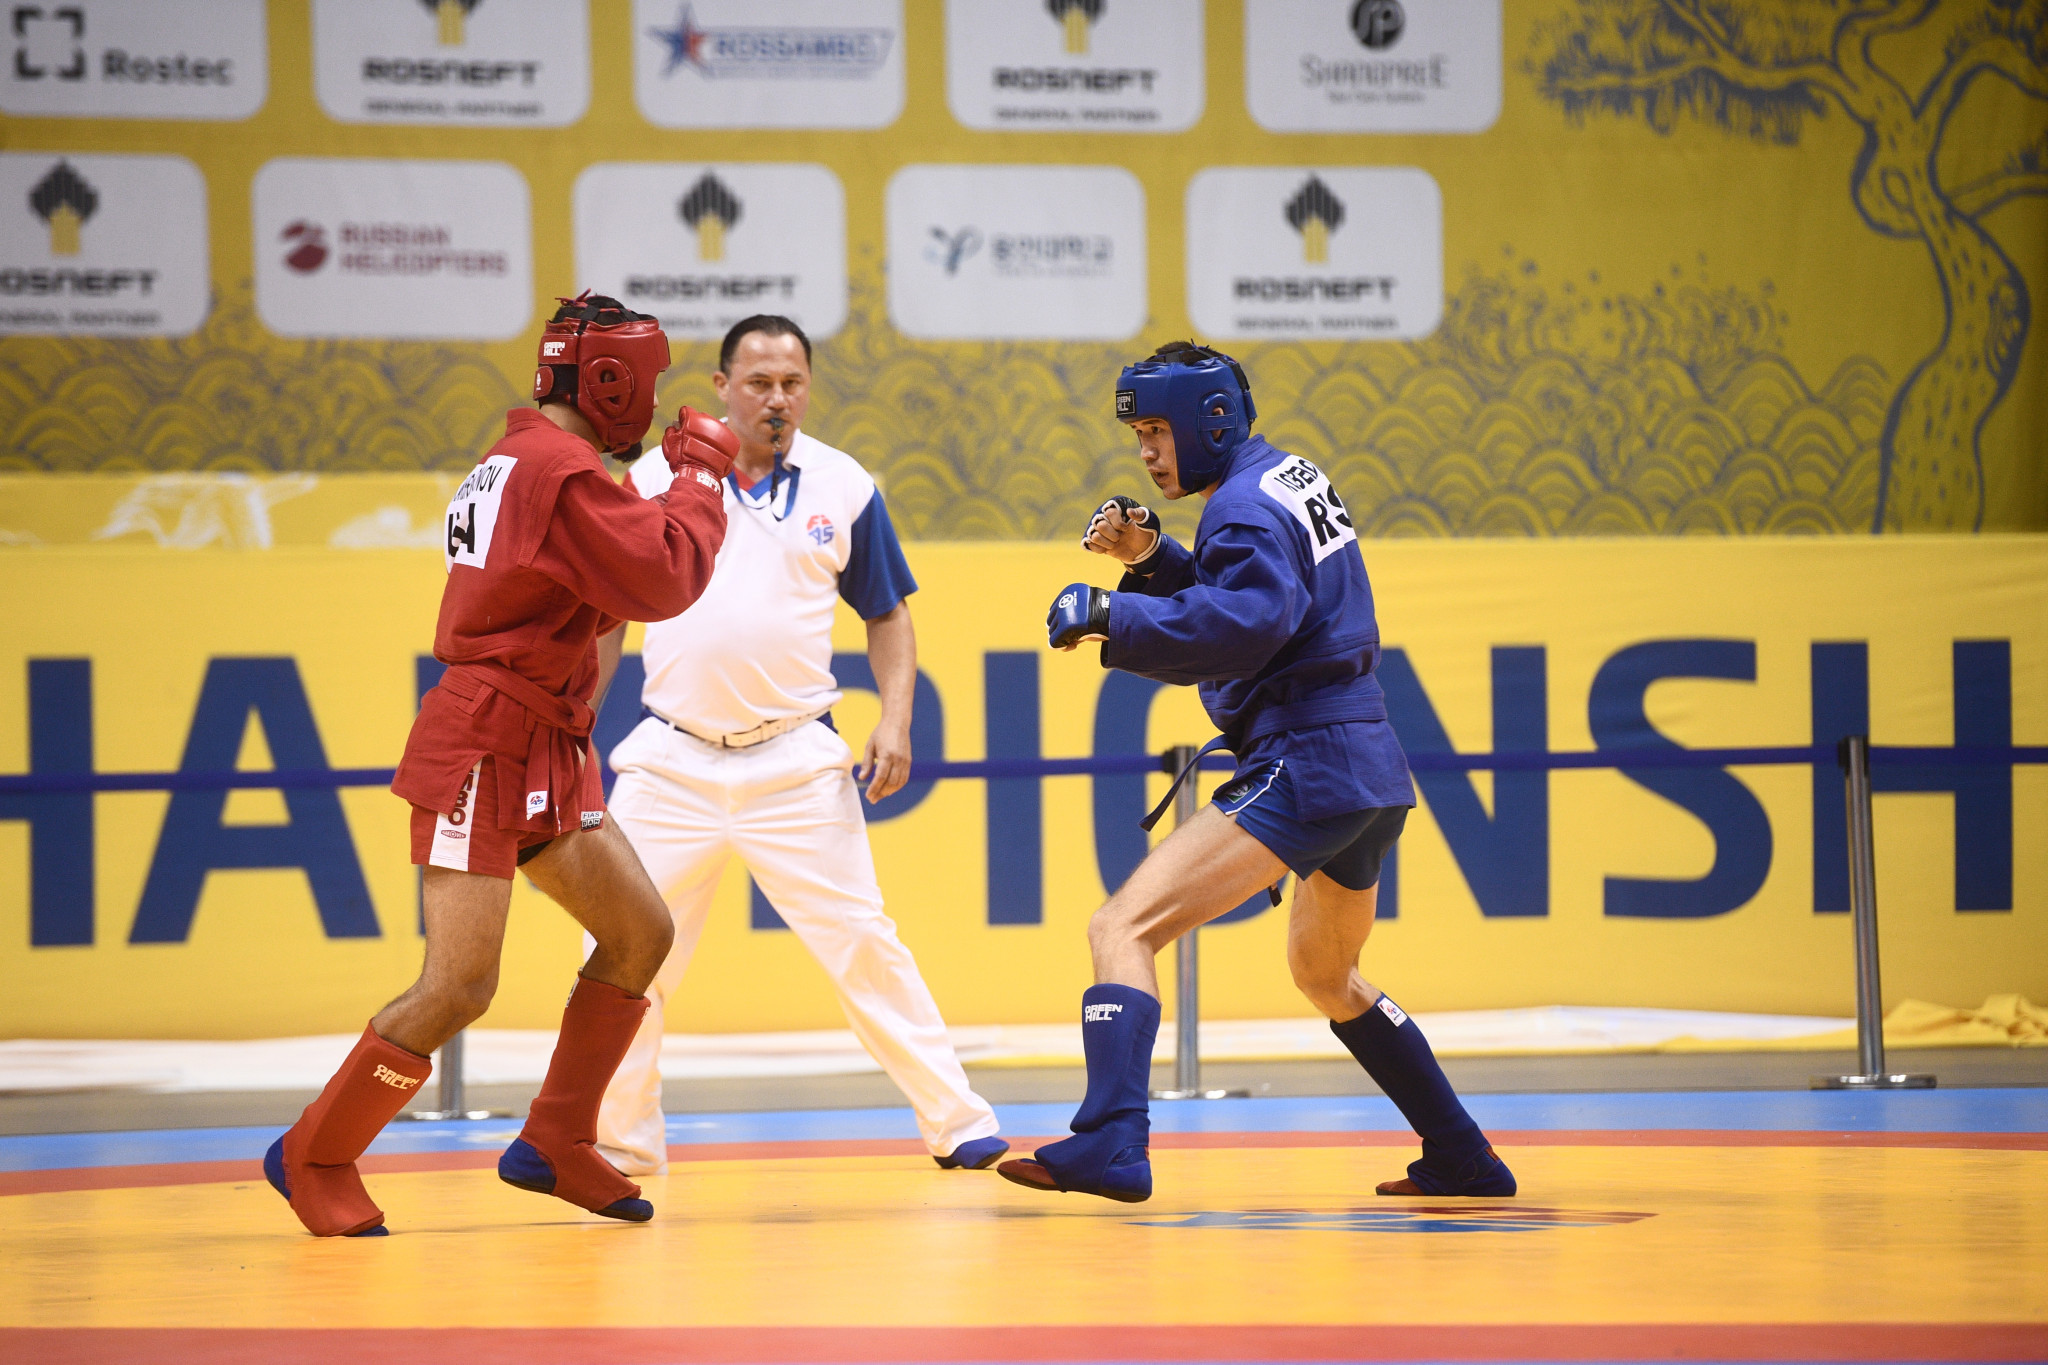 There was plenty of drama as the combat sambo competition drew to a conclusion ©FIAS 